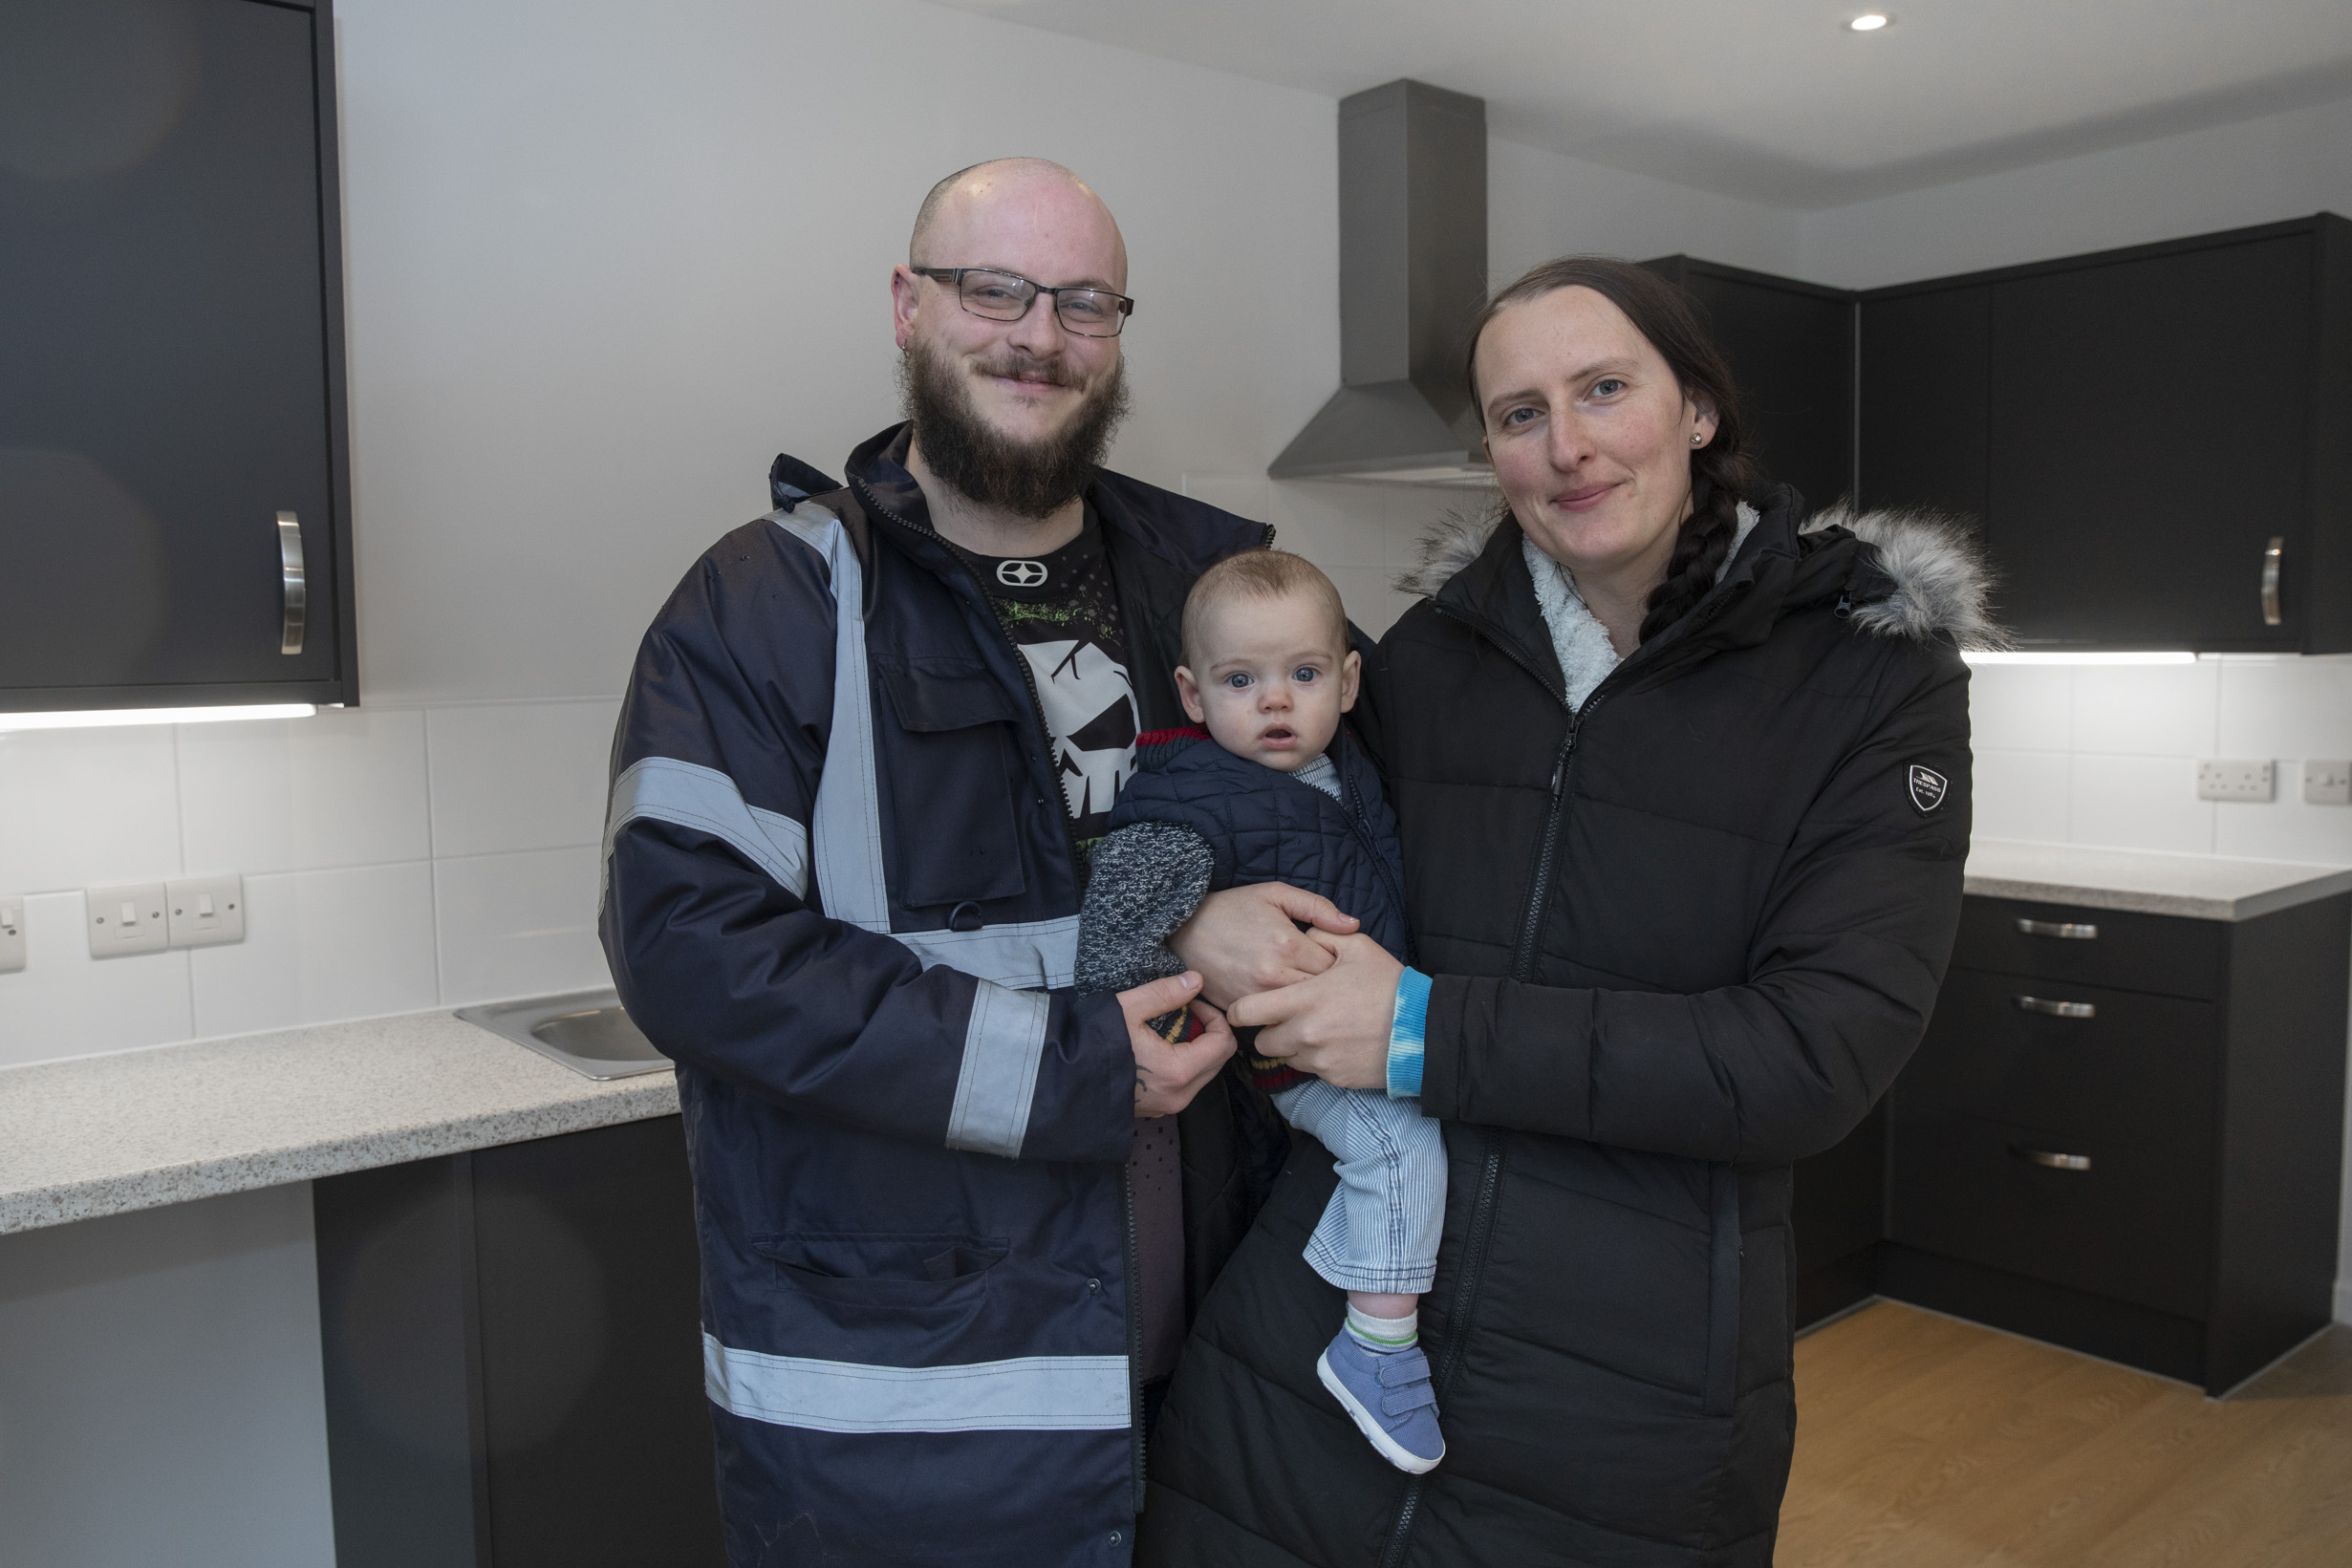 Residents move into newly completed energy efficient affordable homes